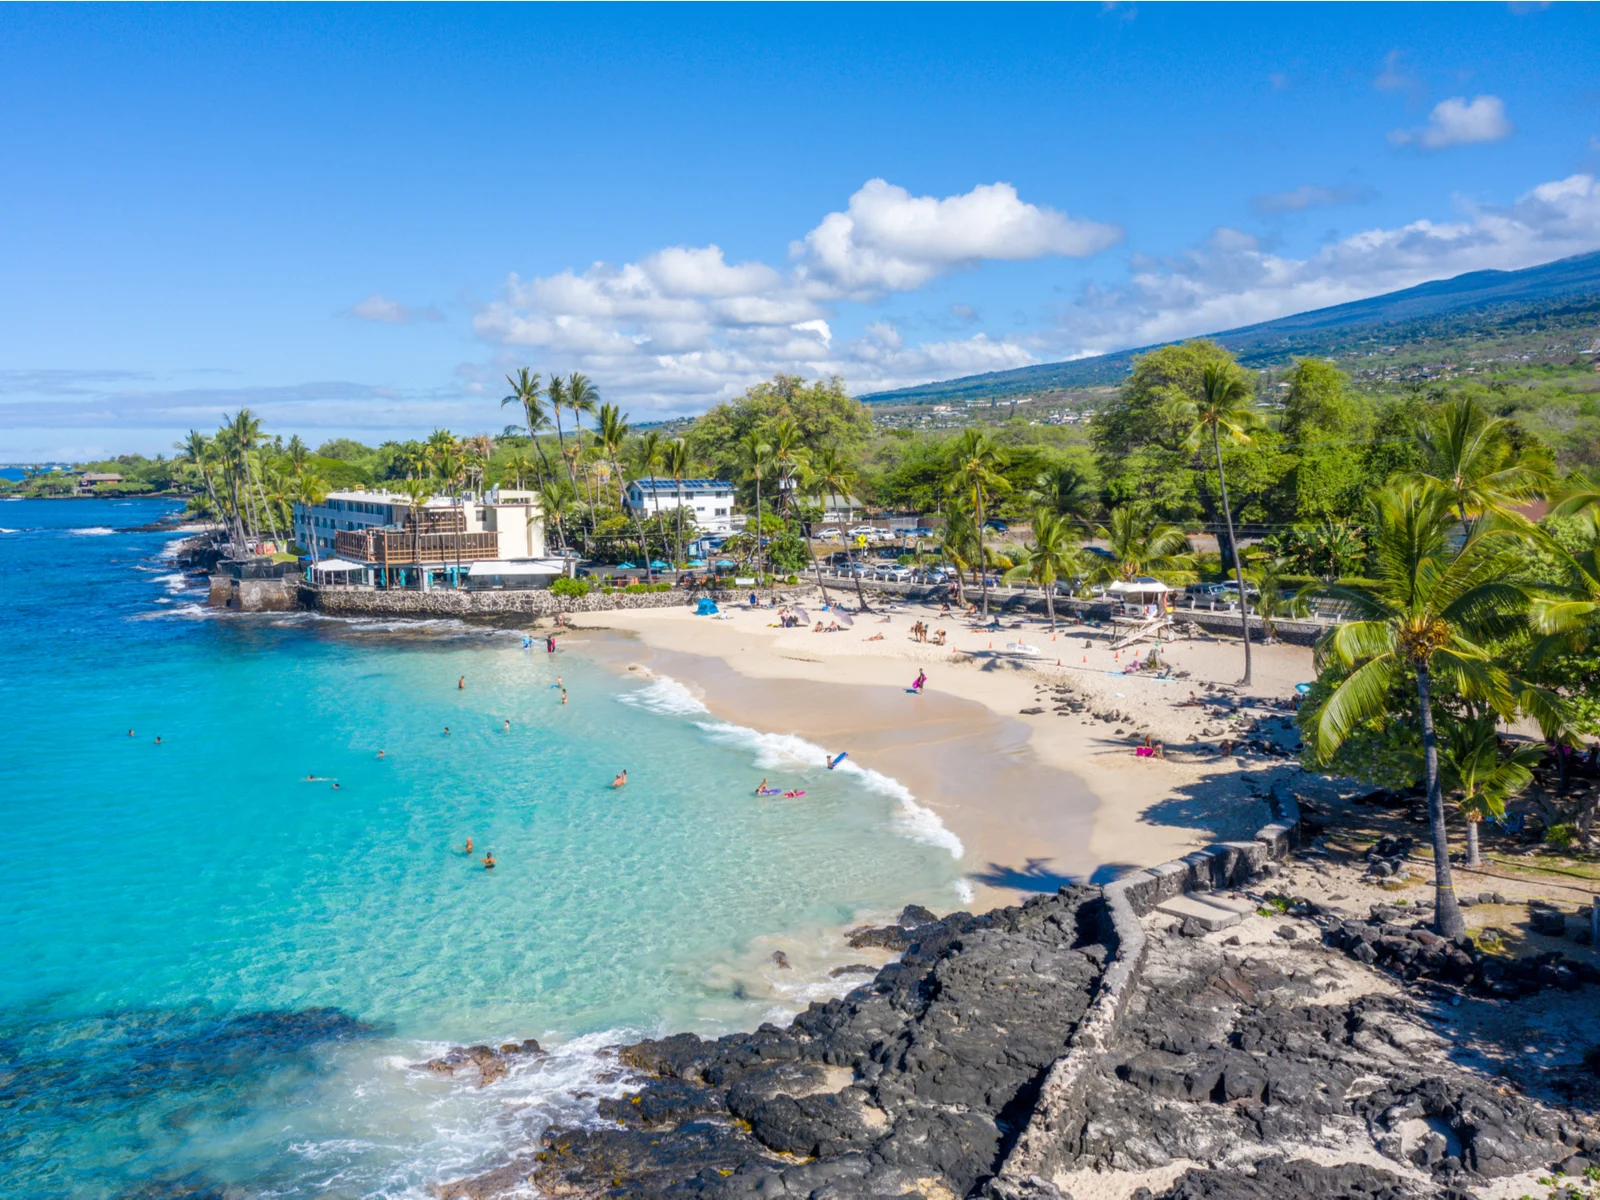 Magic Sands Beach, home to some of the best hotels in Kona, pictured on a sunny day with clear teal water